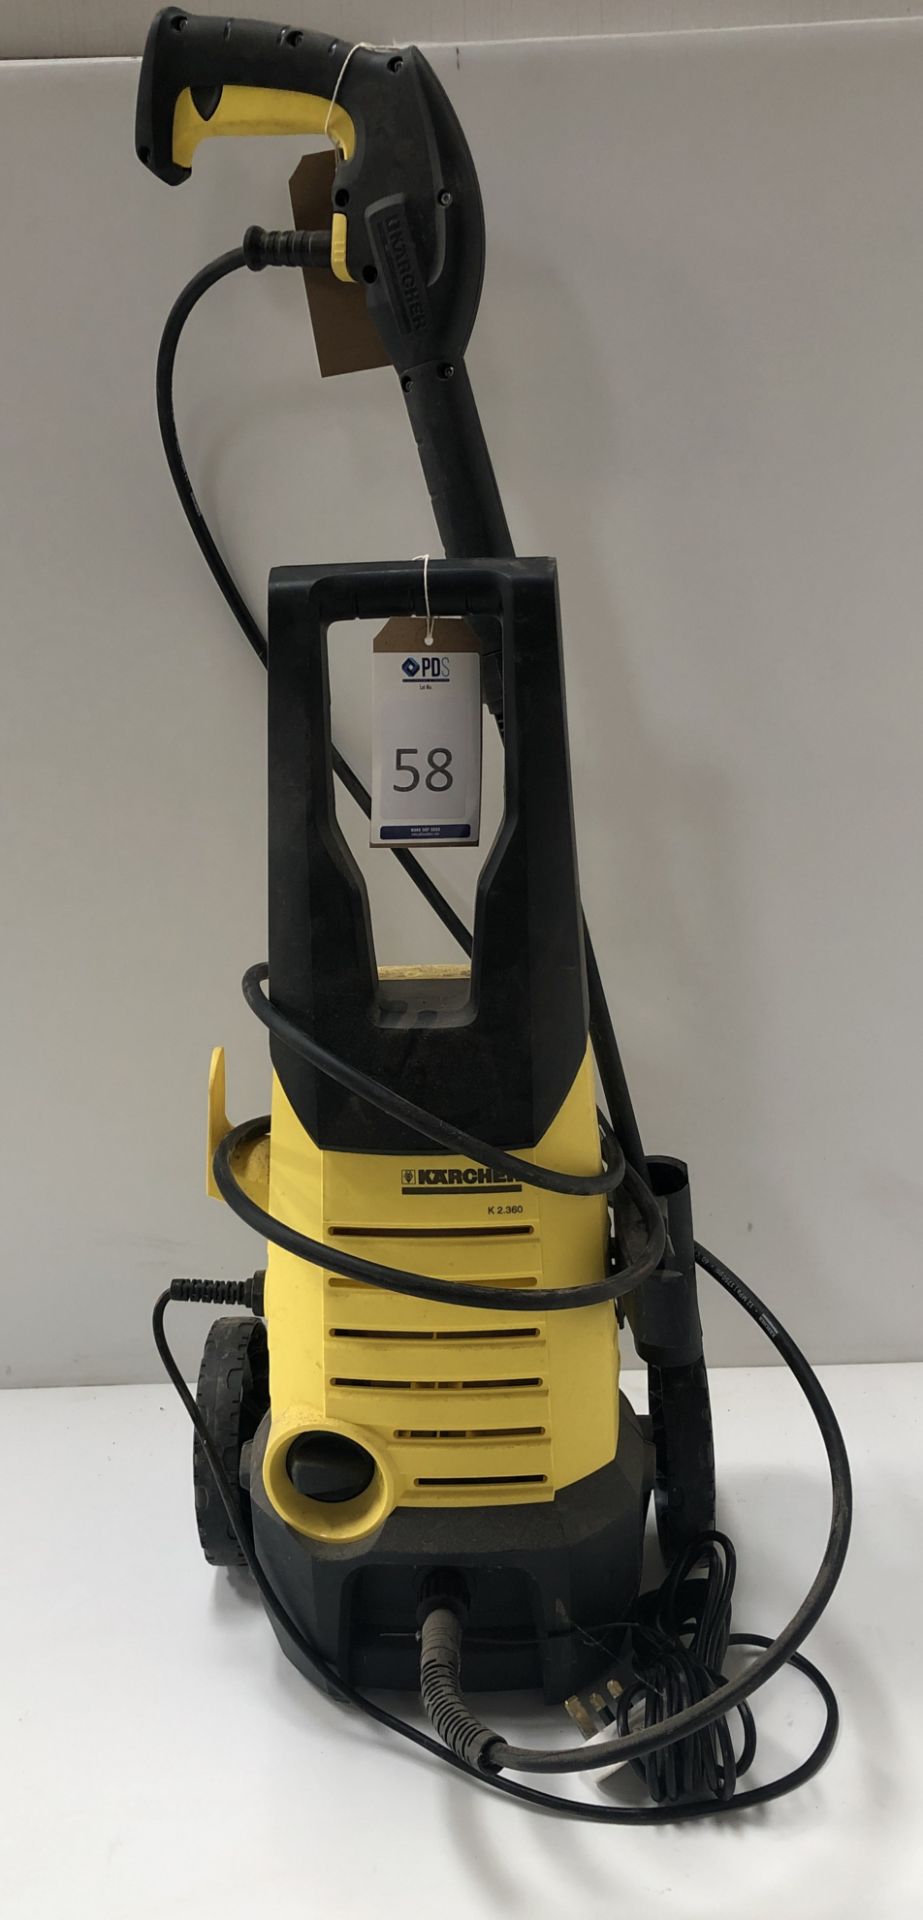 Karcher K2.360 Pressure Washer, Serial Number 017703 80180 (Location: Brentwood. Please Refer to